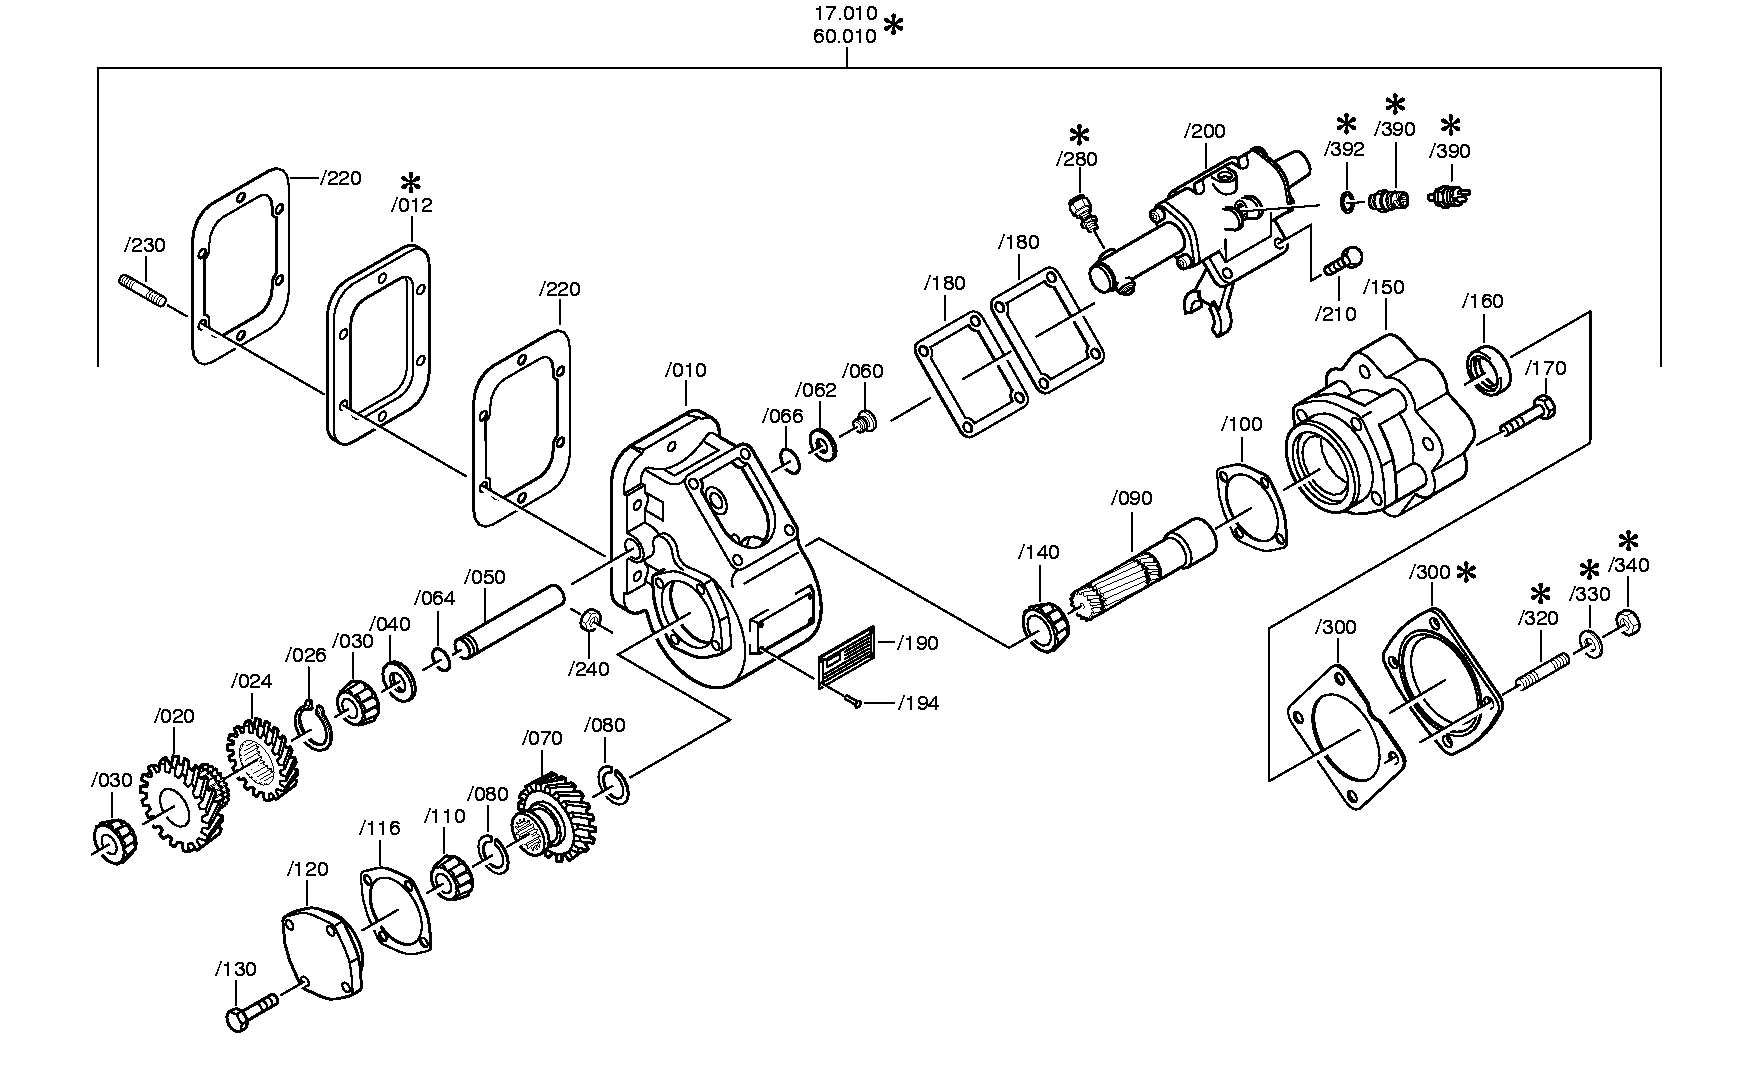 drawing for DAF 1243583 - NS 42/2 (figure 1)